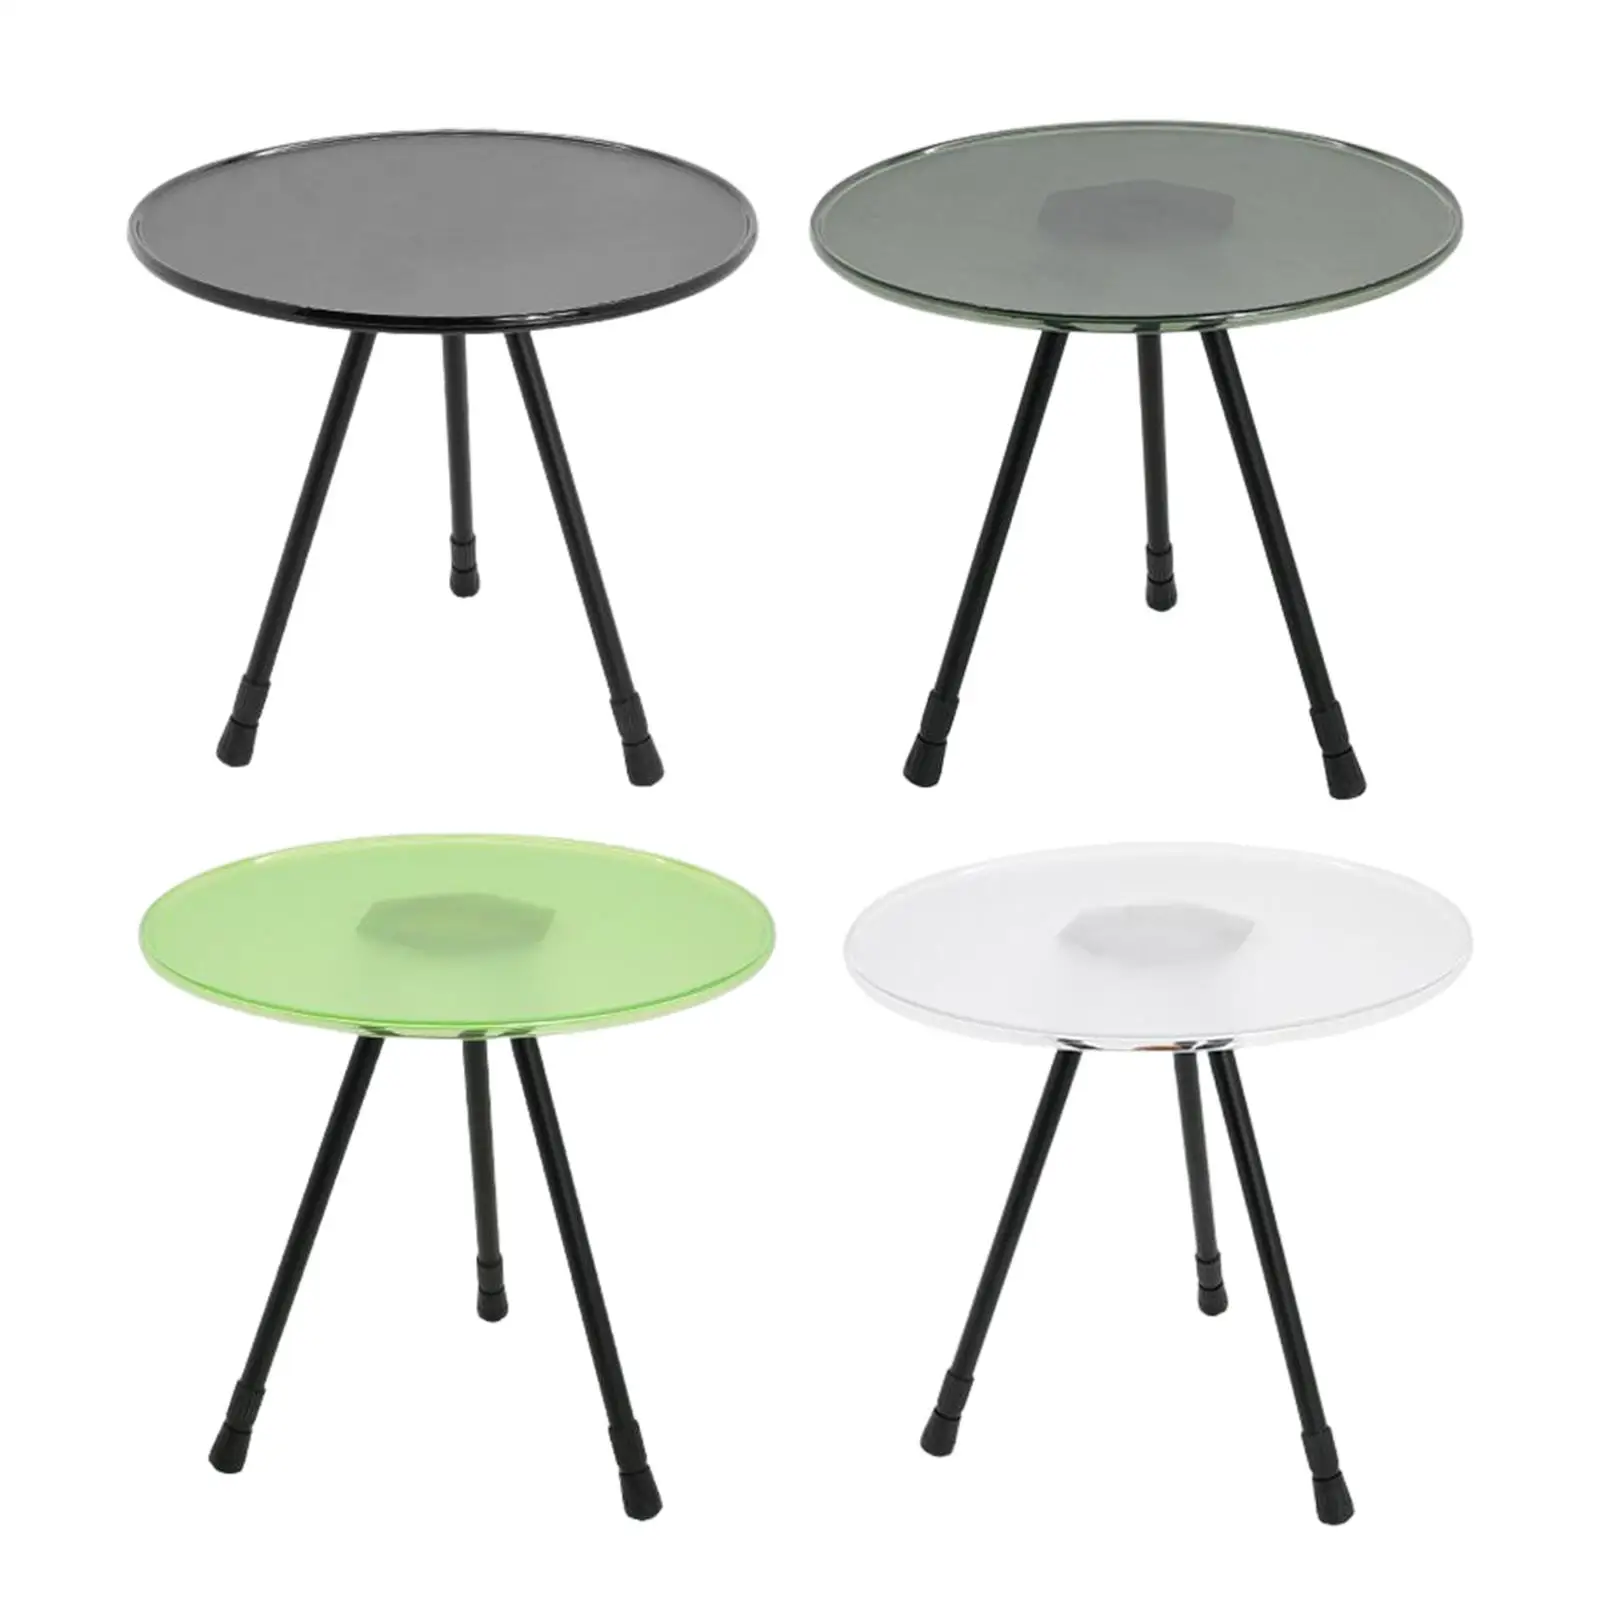 Round Table Collapsible Durable Outdoor Furniture for Picnic Party Garden